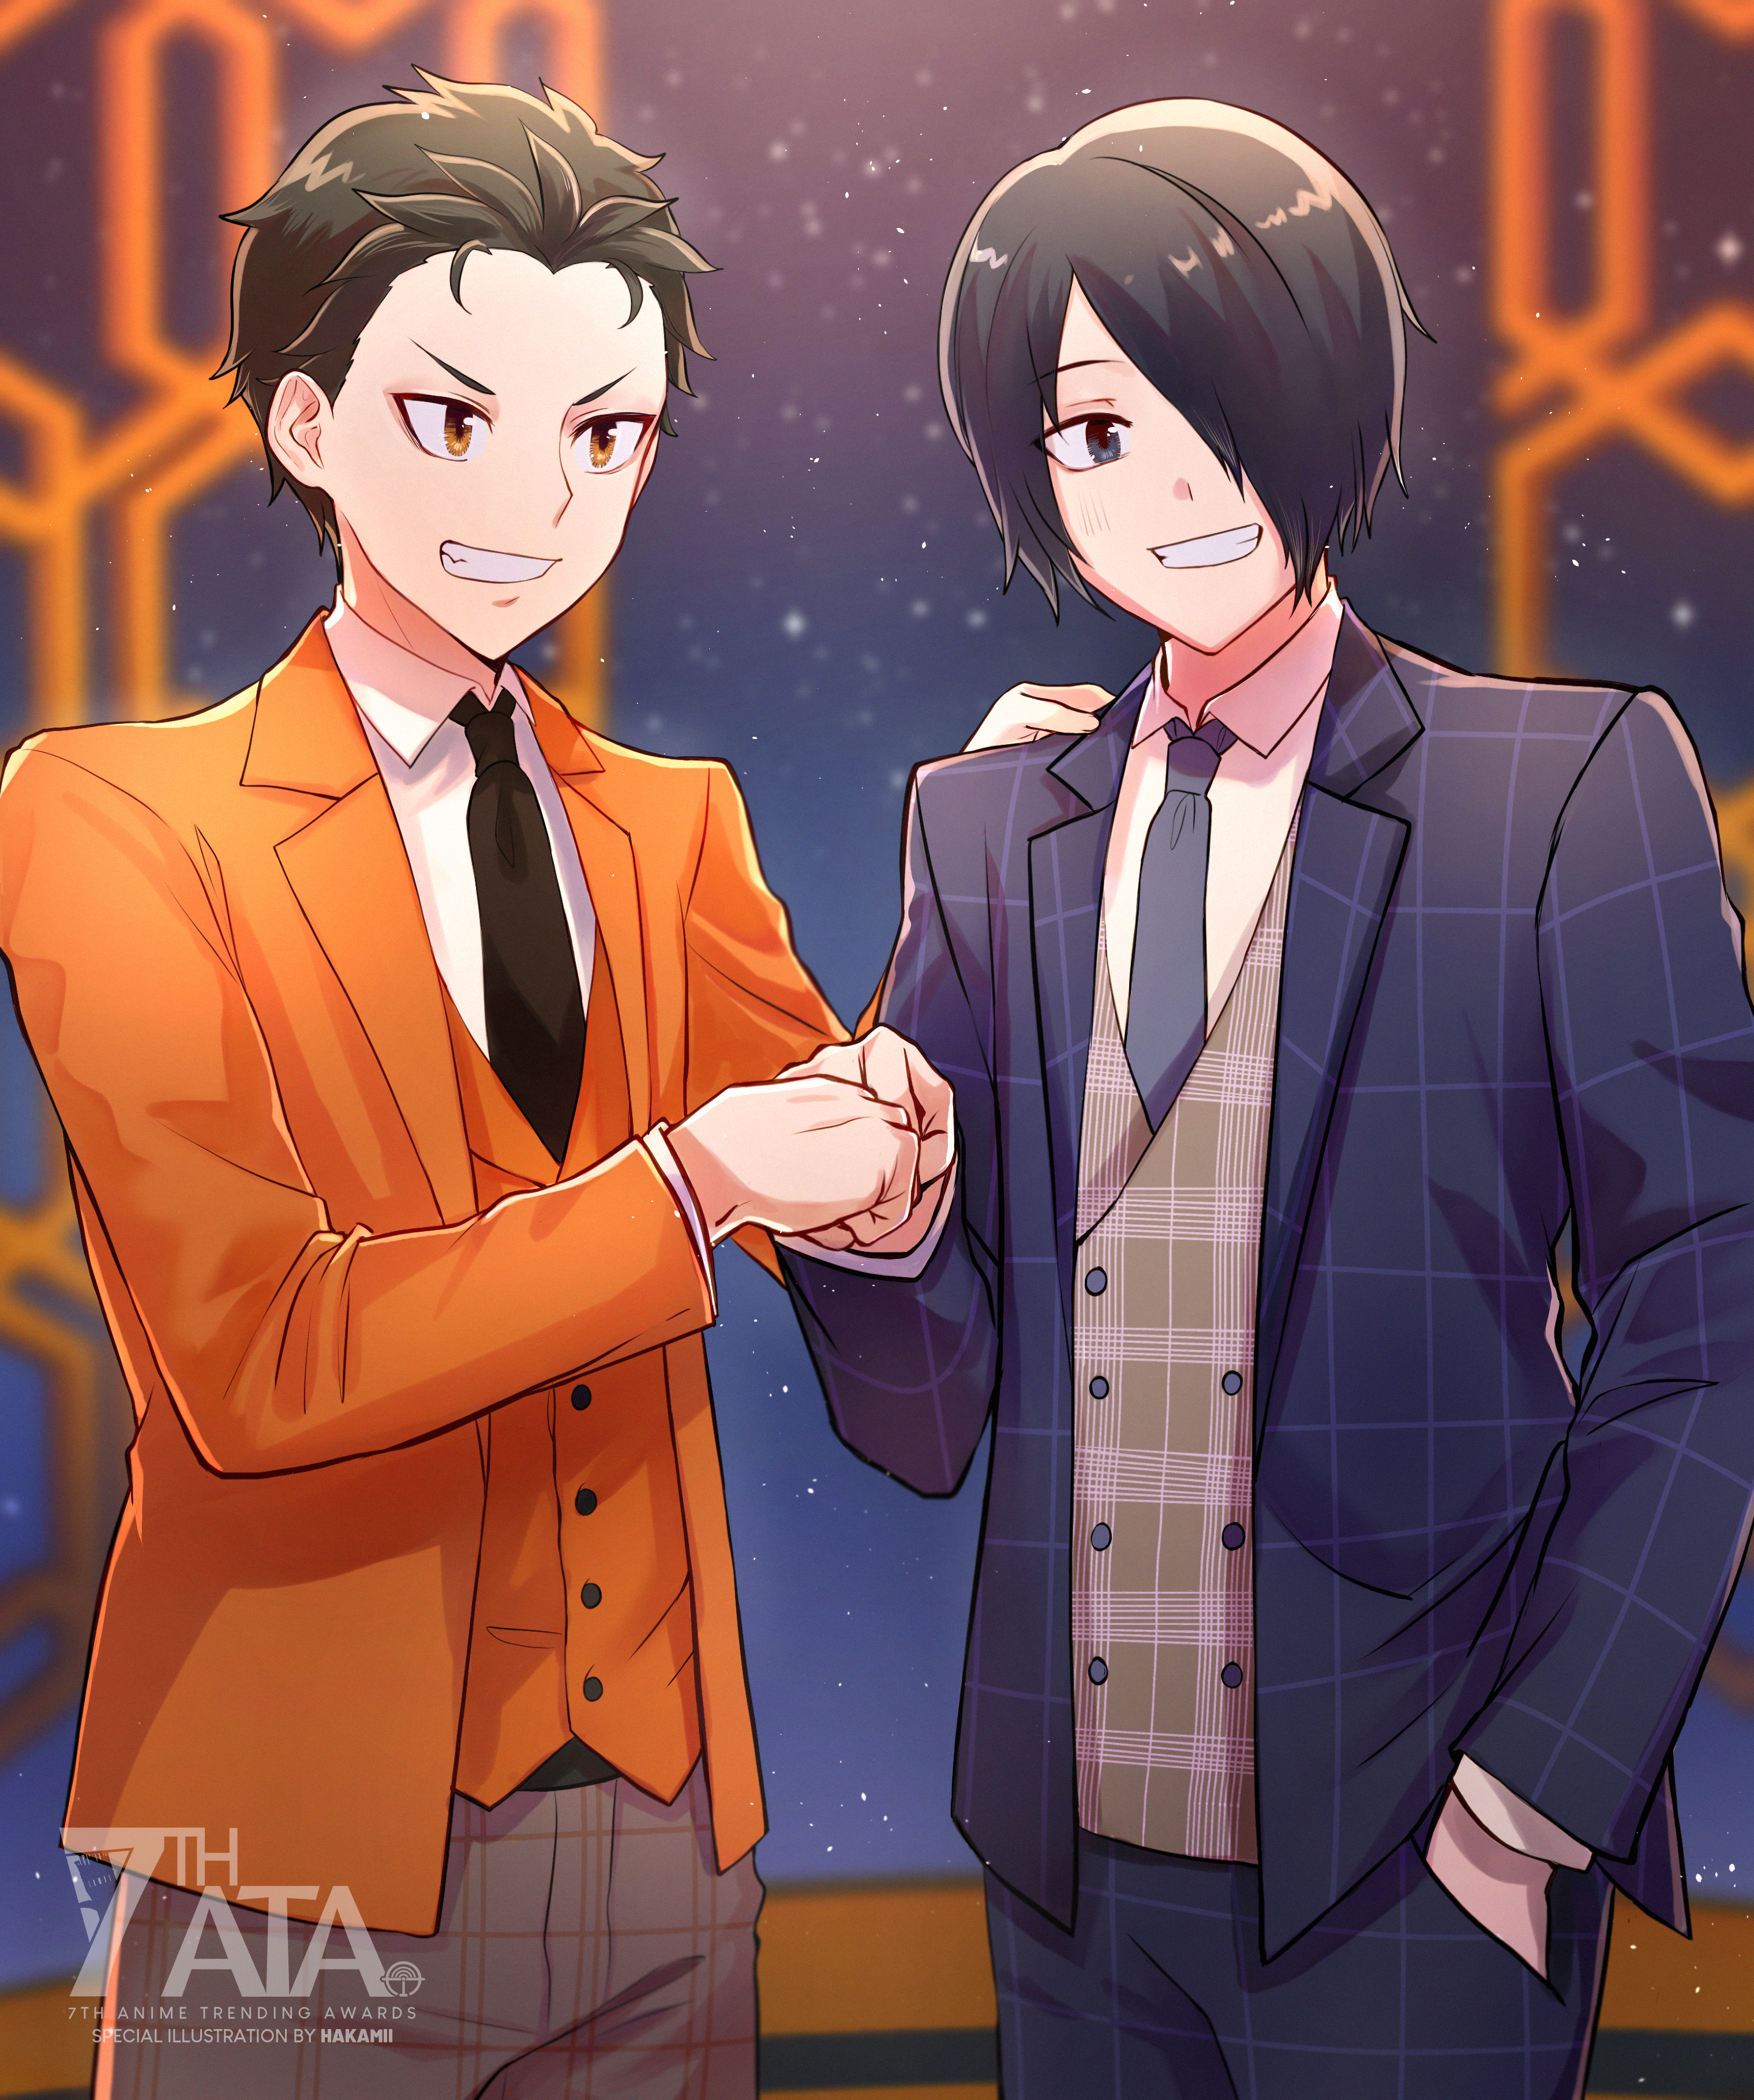 Yuu Ishigami and Subaru Natsuki square off for the Boy of the Year title at 7th Anime Trending Awards